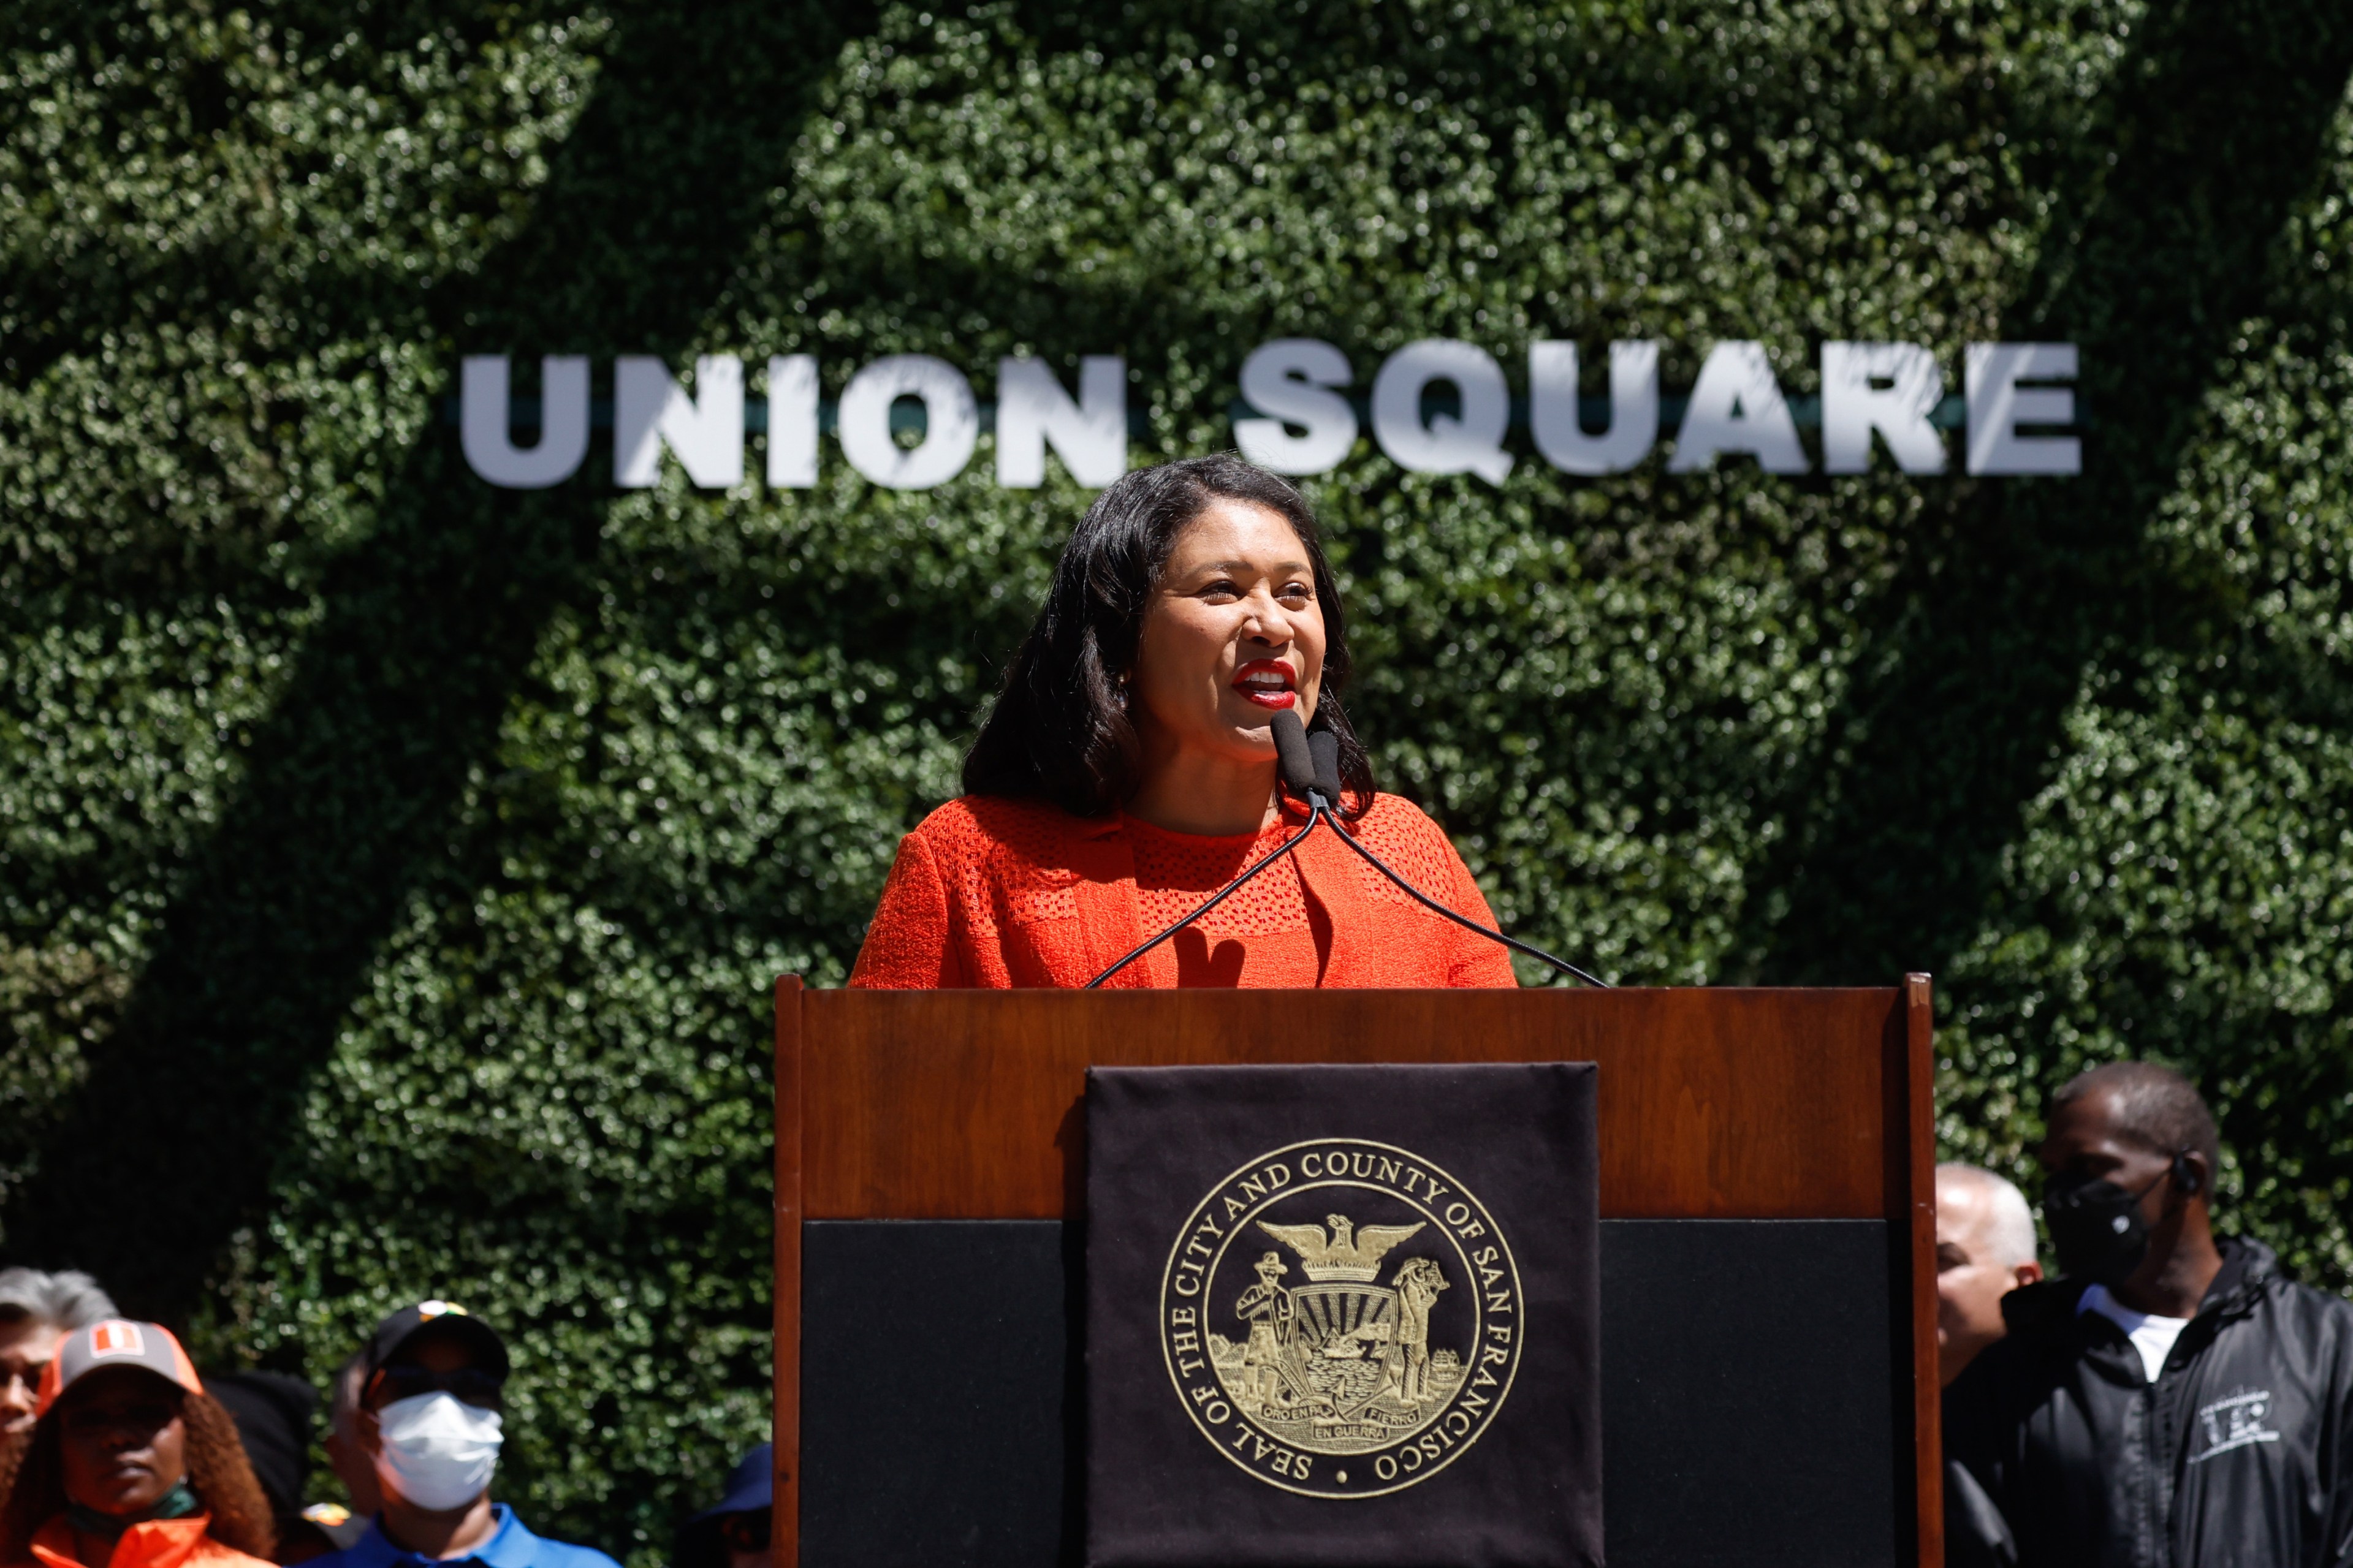 A woman in an orange top is speaking at a podium with a San Francisco seal. Behind her is a green foliage wall with the words "Union Square" in large, white letters.